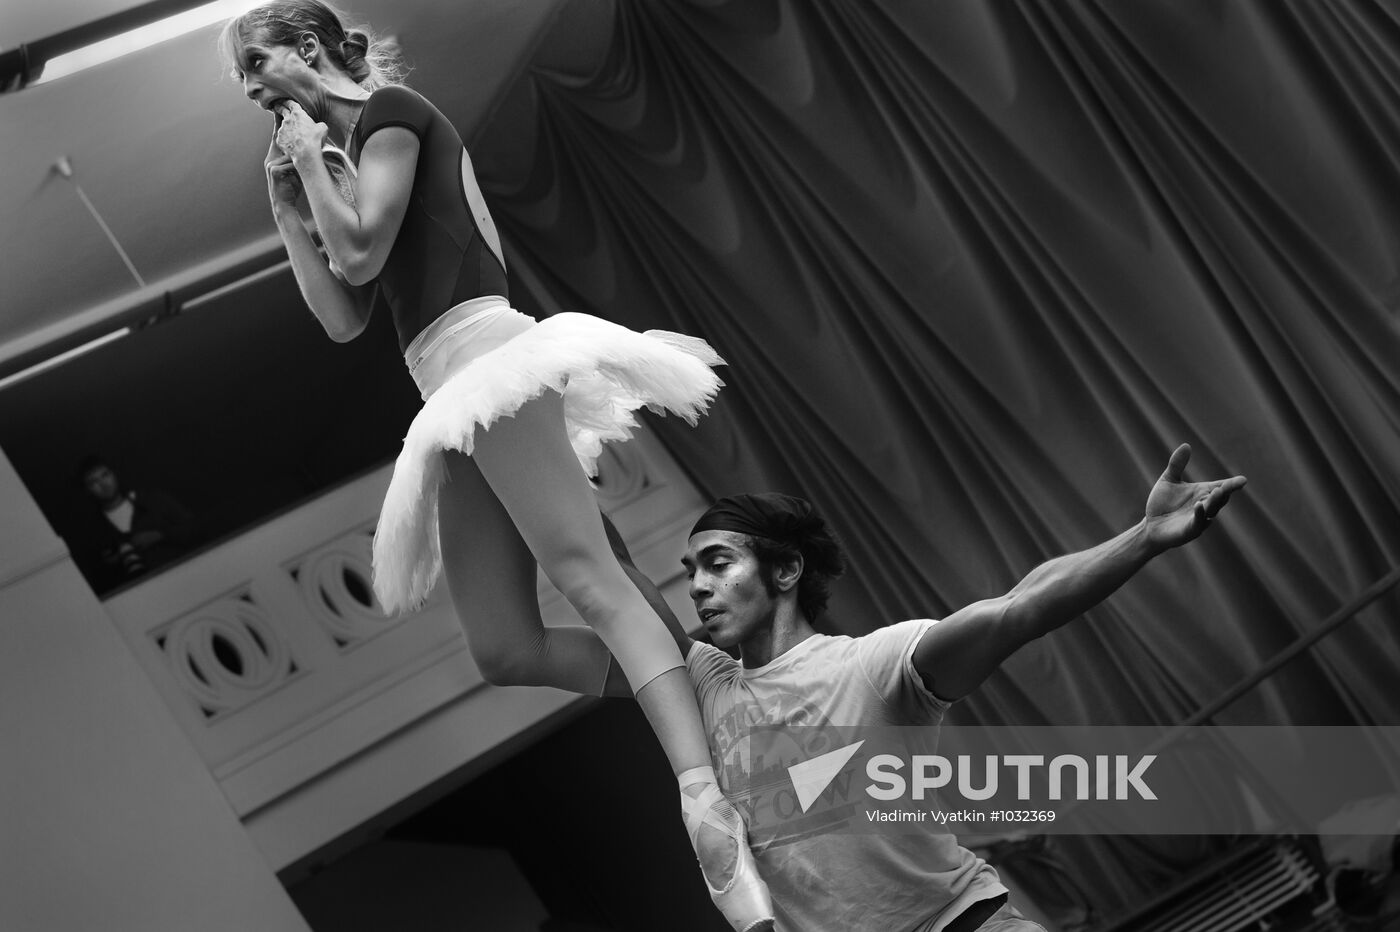 World ballet dancers rehearse in Moscow